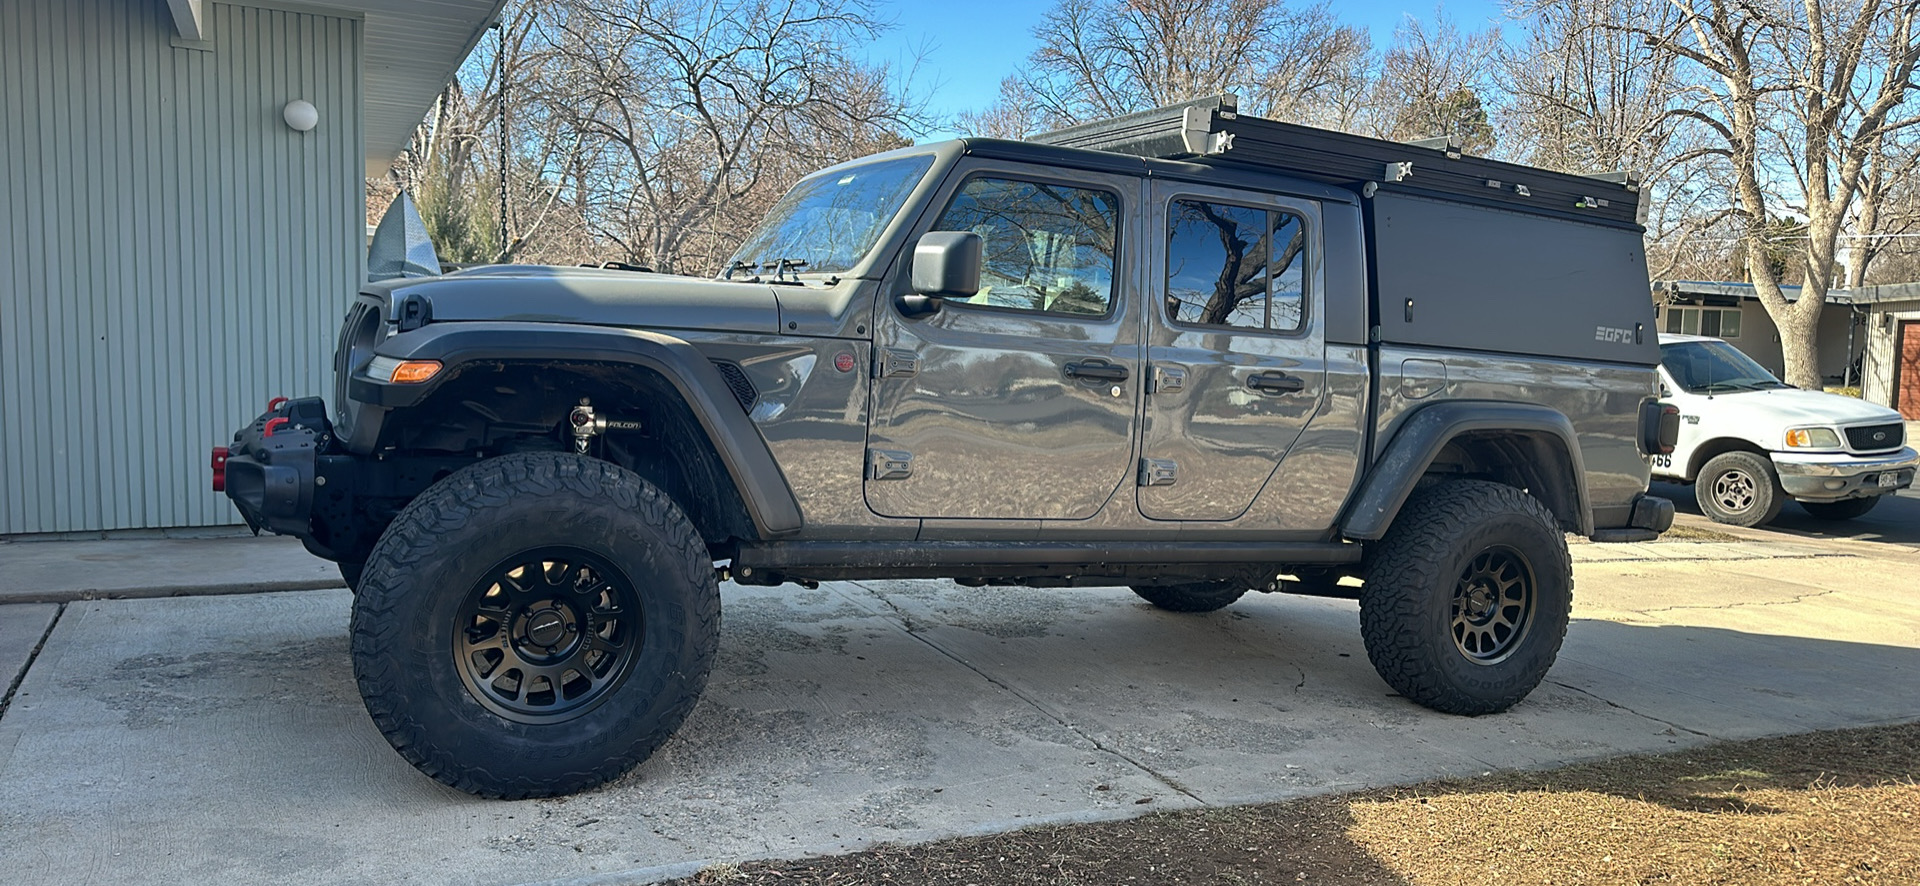 Jeep Gladiator Cheap Jeep Parts in Denver: sold 60A79FCF-91AD-4564-AE0A-5D27C14910C4